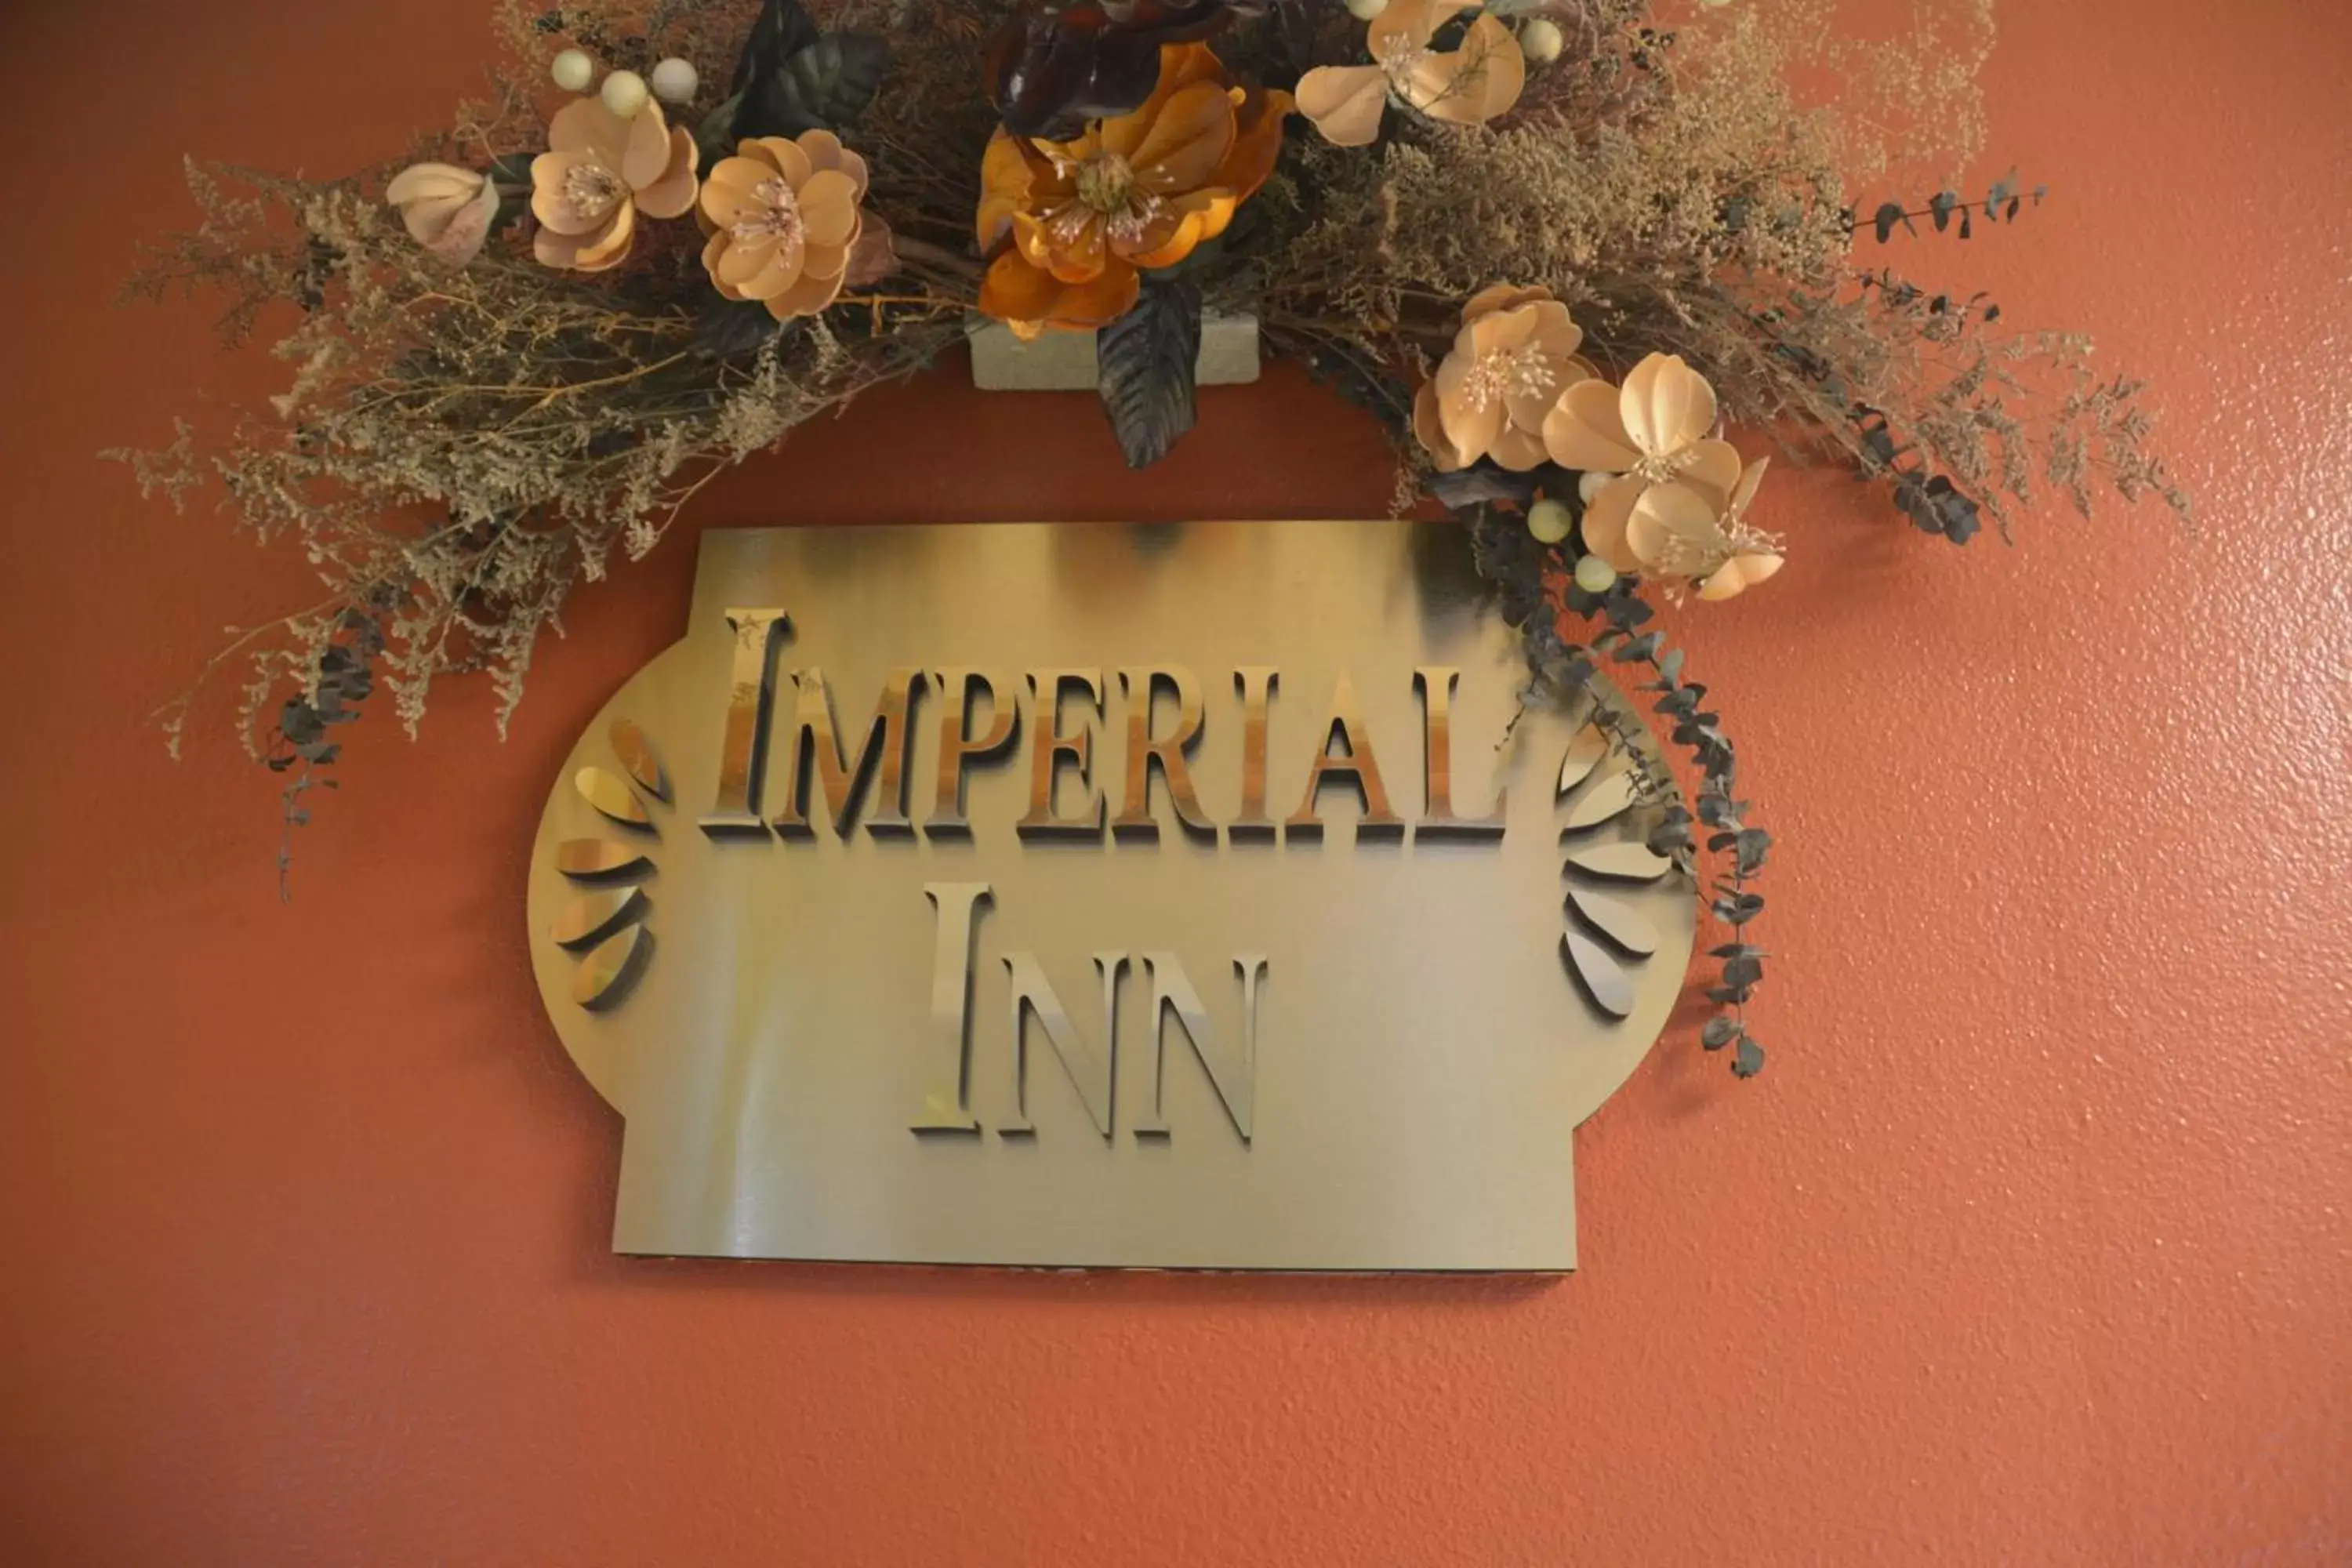 Property logo or sign in Imperial Inn Oakland